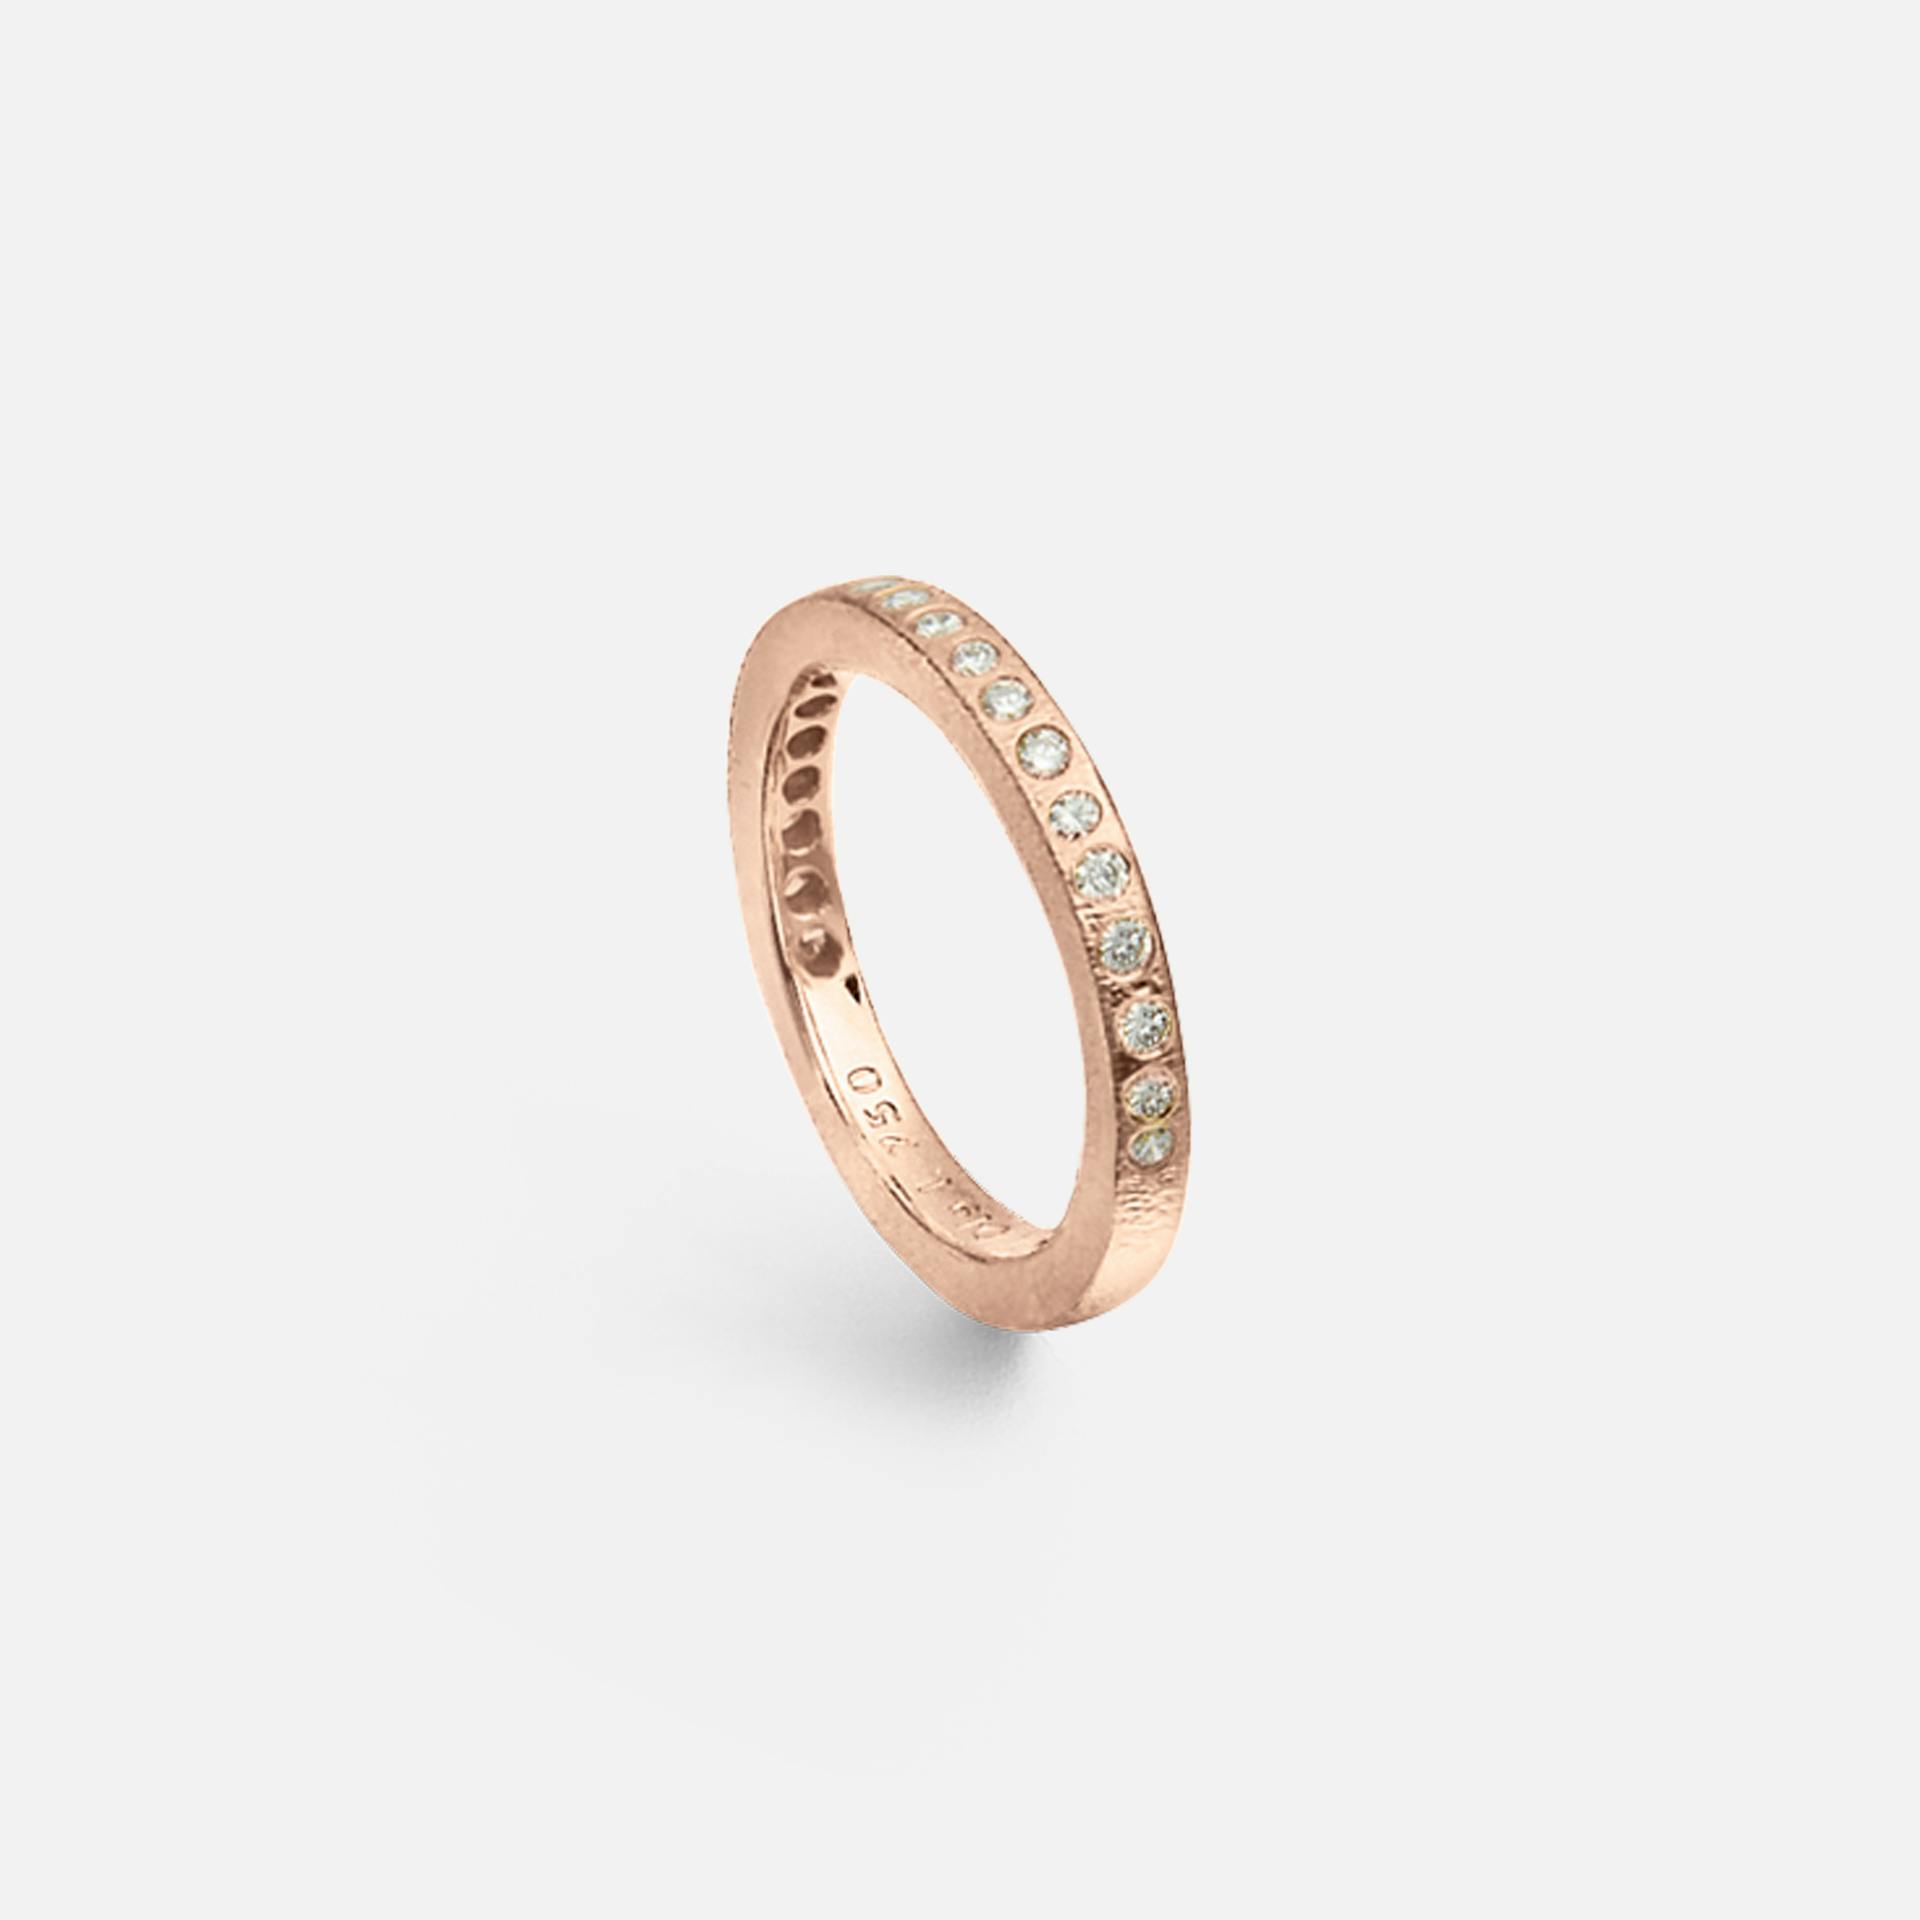 Forever Love ring 18k textured rose gold with diamonds 0.38-0.46 ct. TW. VS.